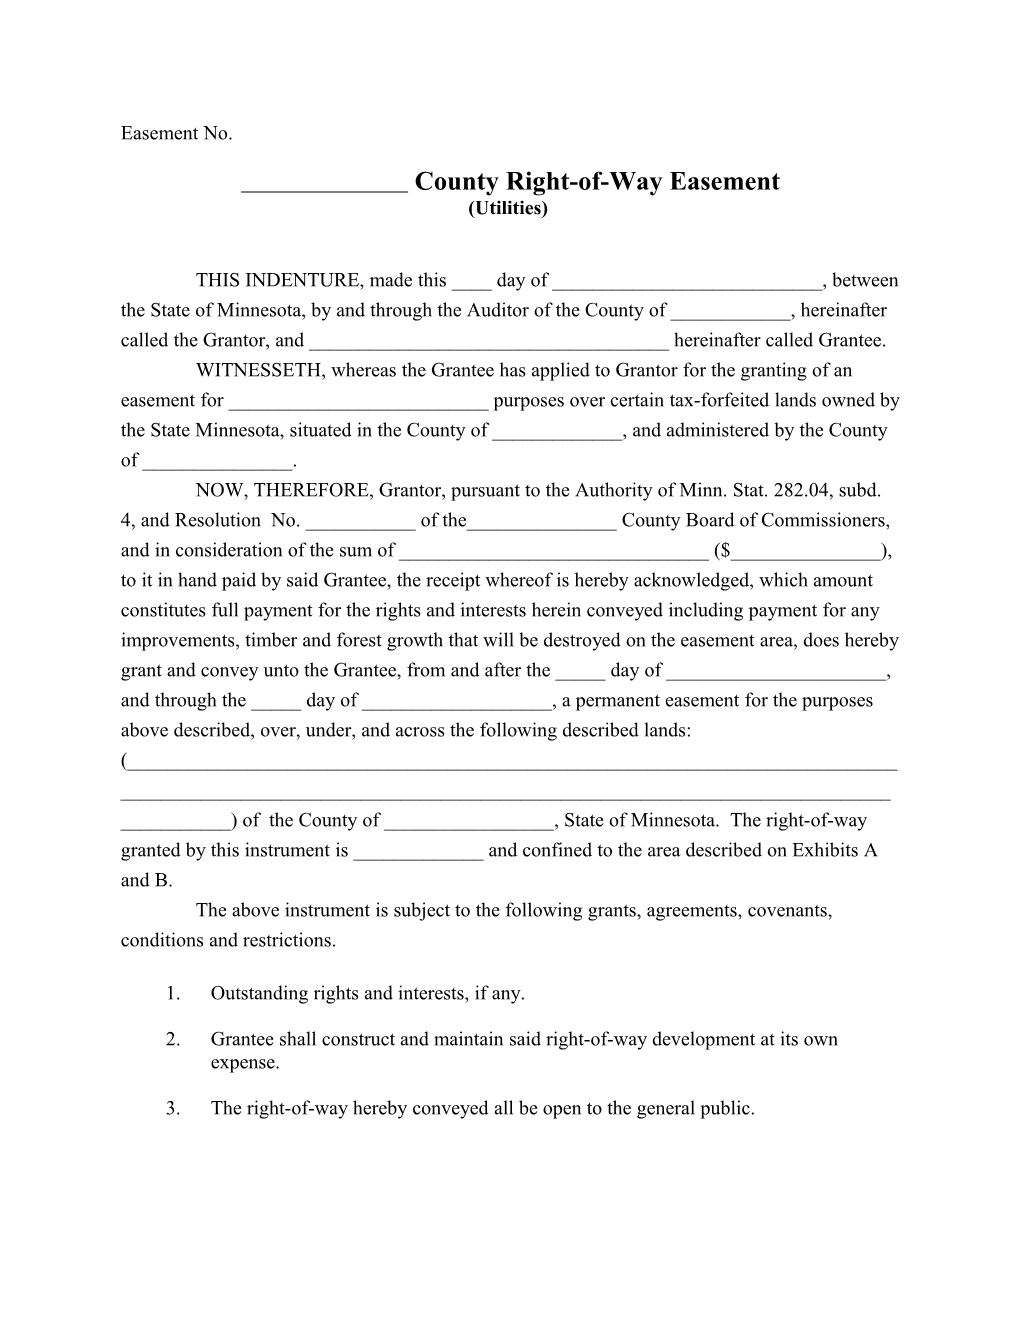 County Right-Of-Way Easement